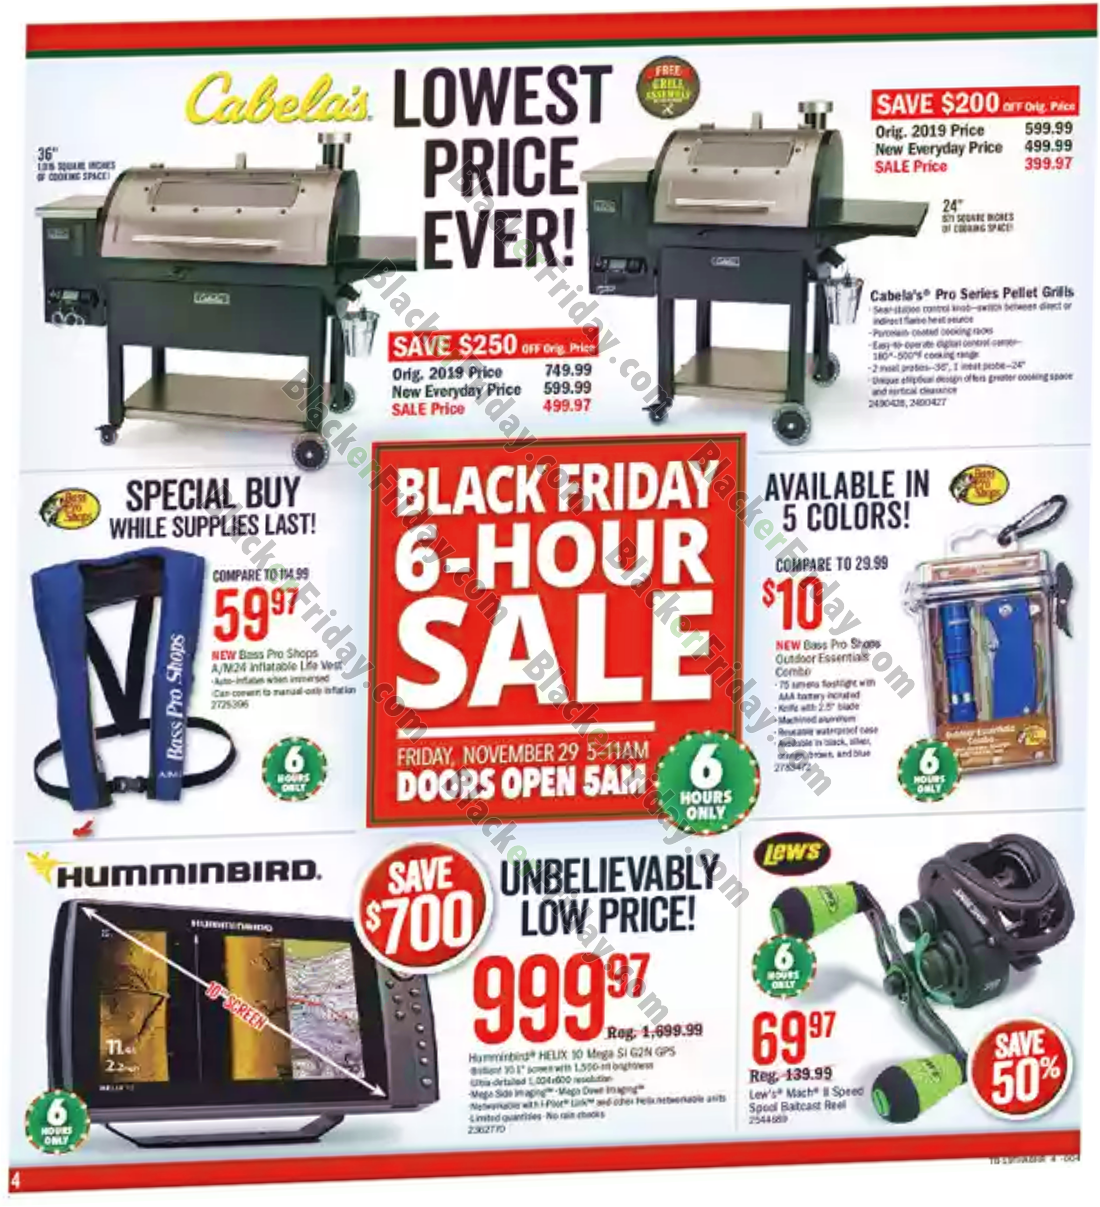 Bass Pro Shops Black Friday 2020 Sale - What to Expect - Blacker Friday